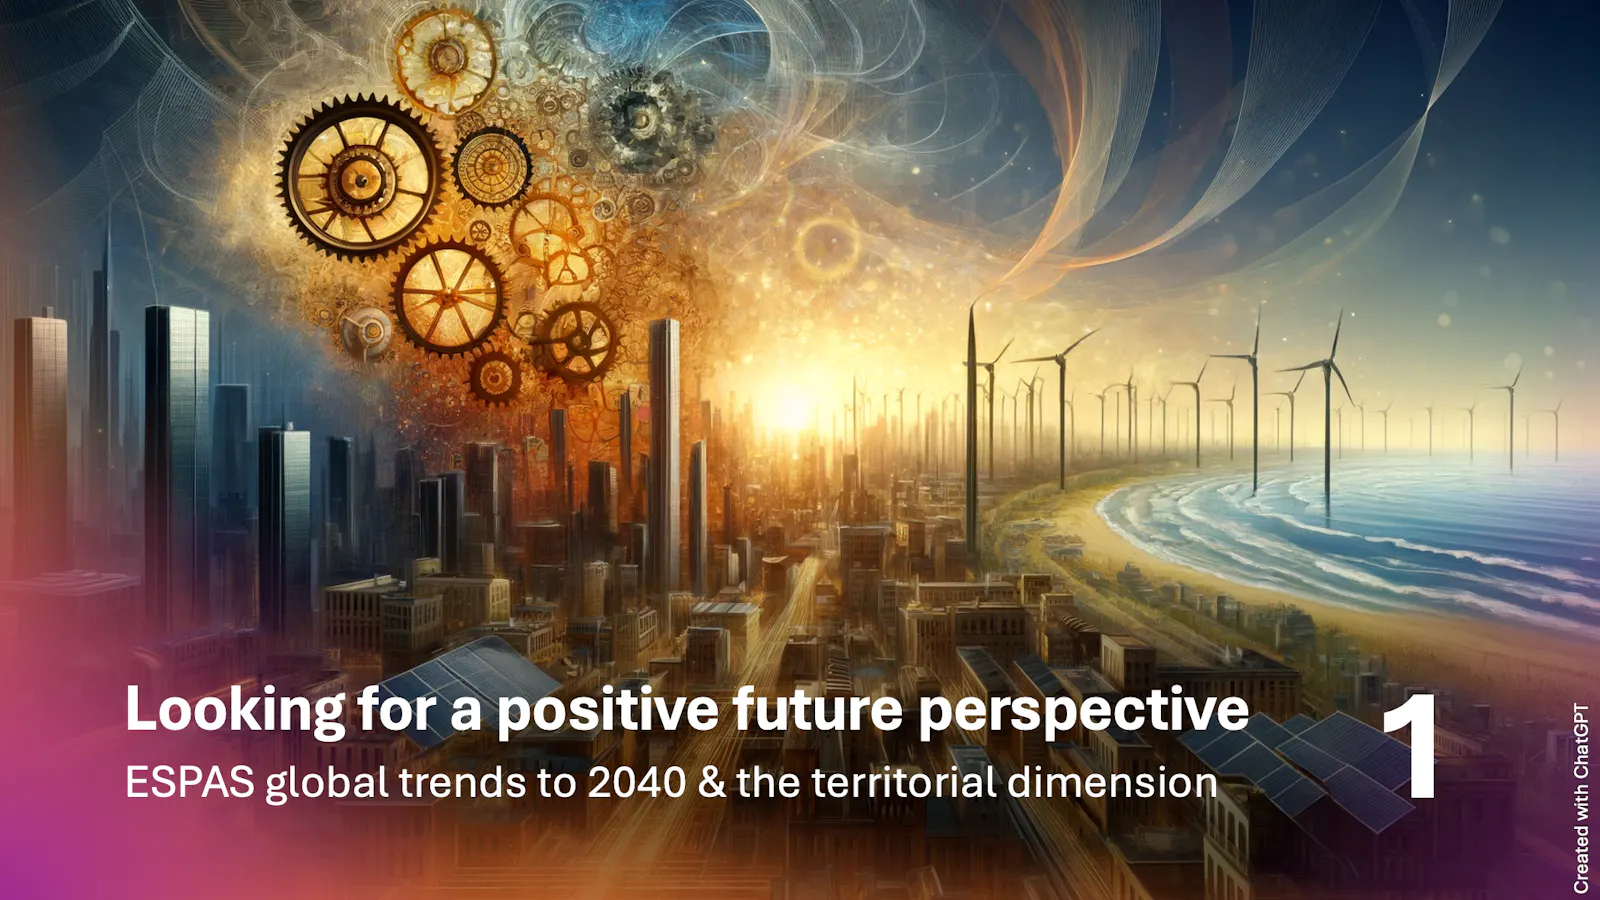 Looking for a positive future perspective. ESPAS global trends to 2040 & their territorial dimension. Part 1.